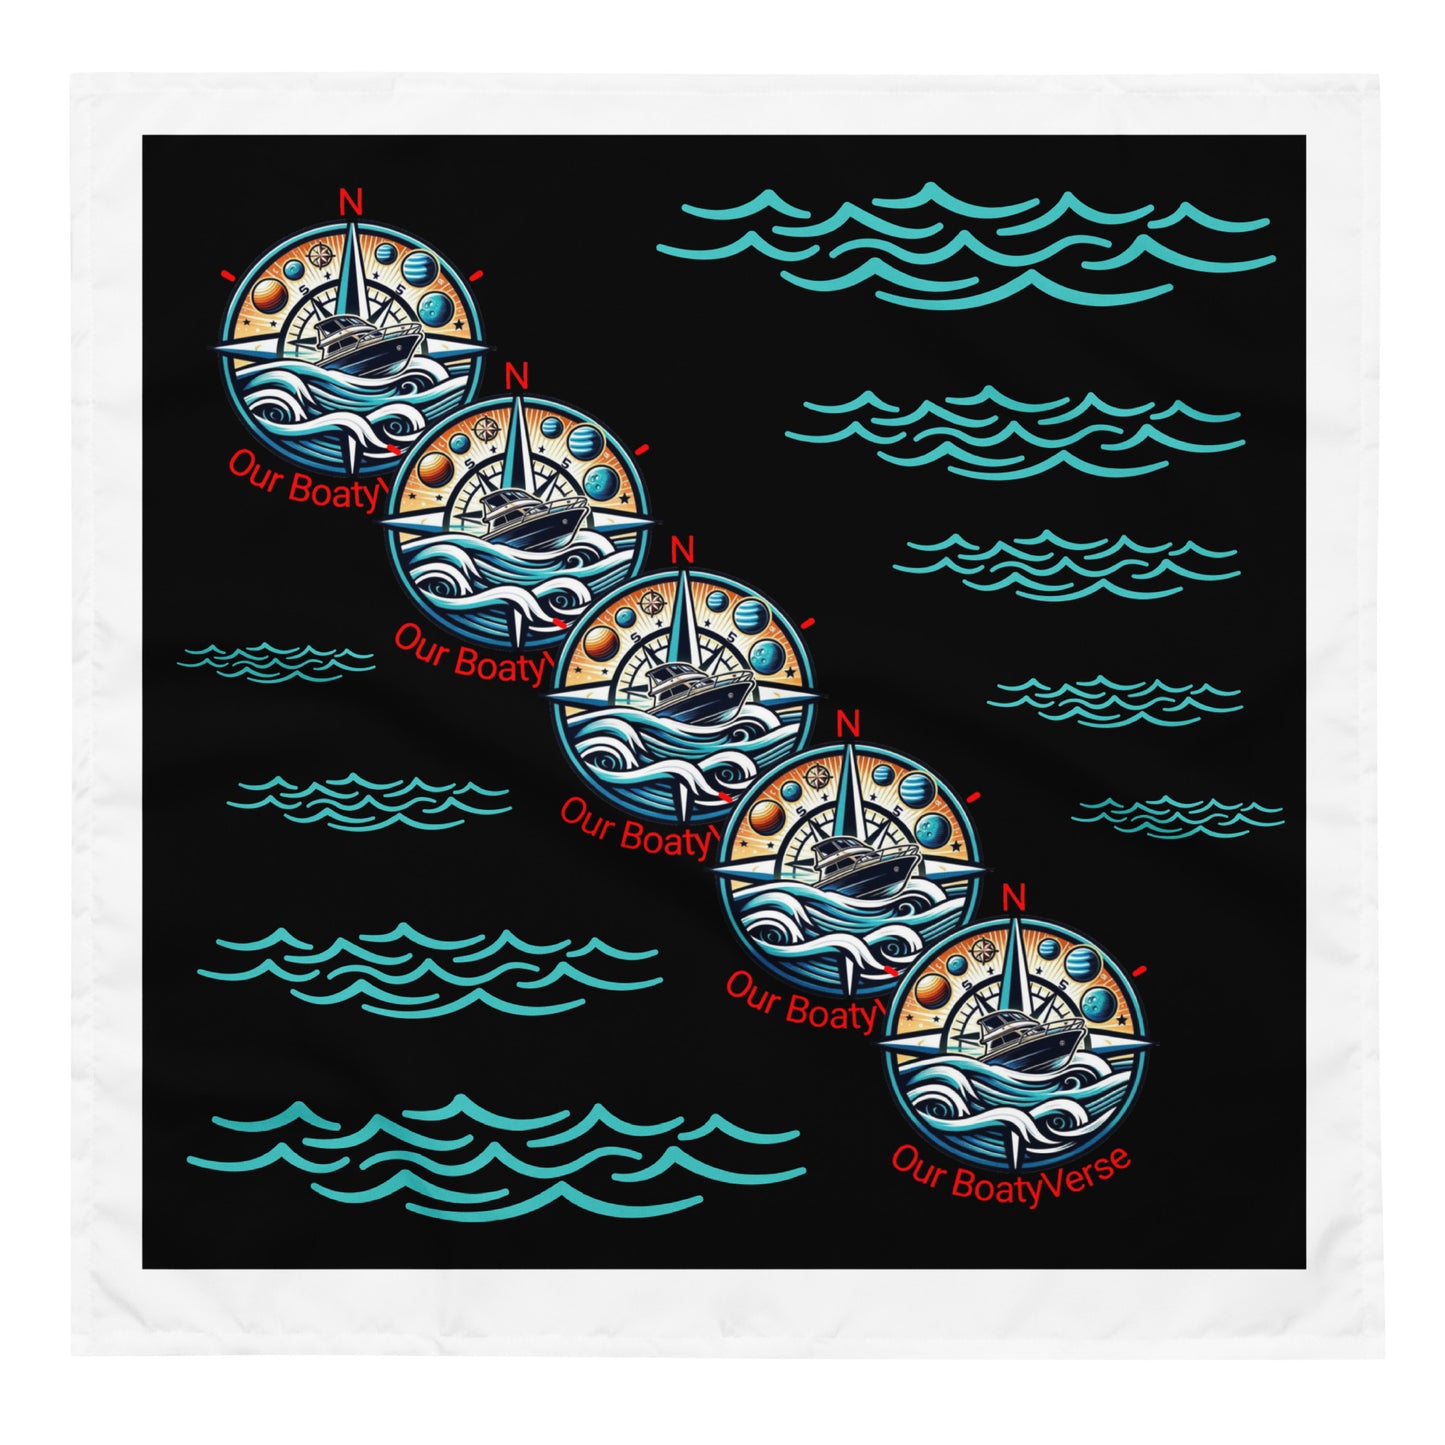 Ocean Waves All-over print bandana by Our BoatyVerse